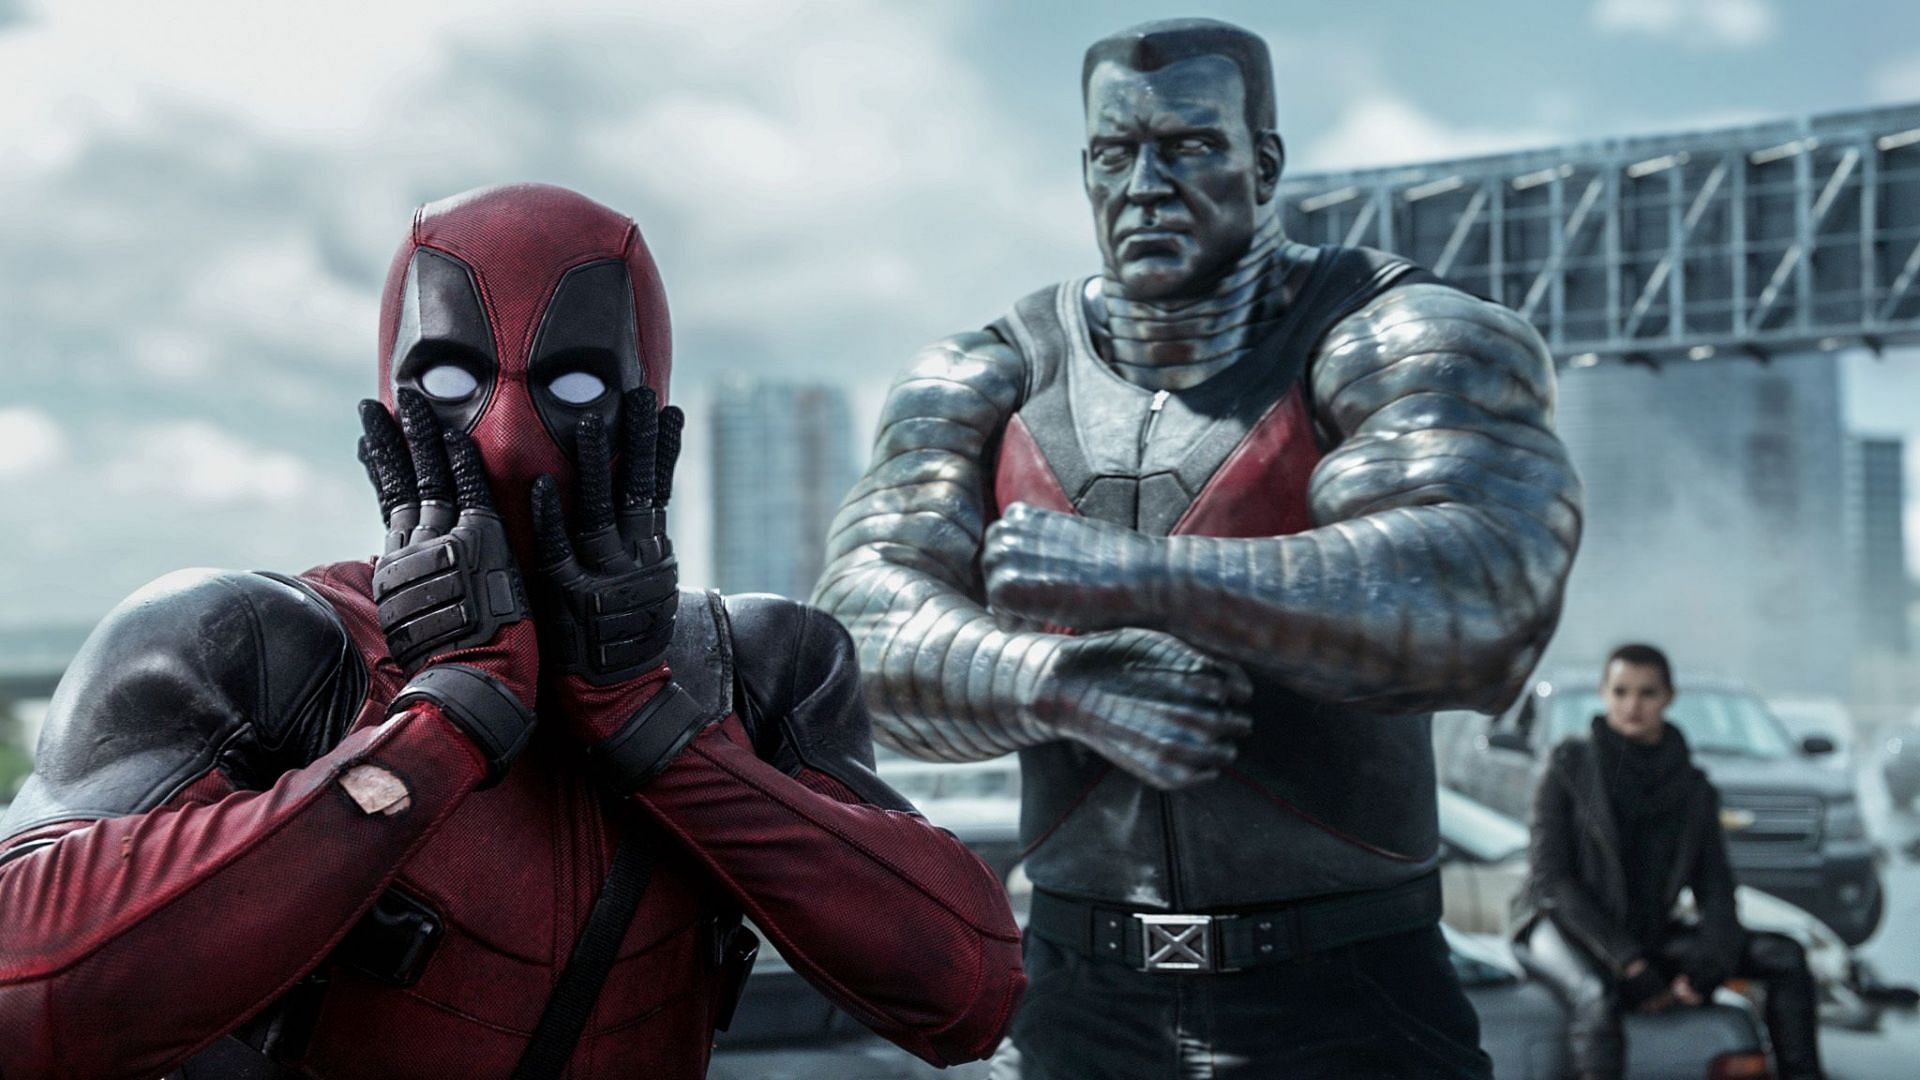 Marvel Lovers - Deadpool 3 Check it here👉  deadpool-3-trailer-release-date-more-you-need-to-know/